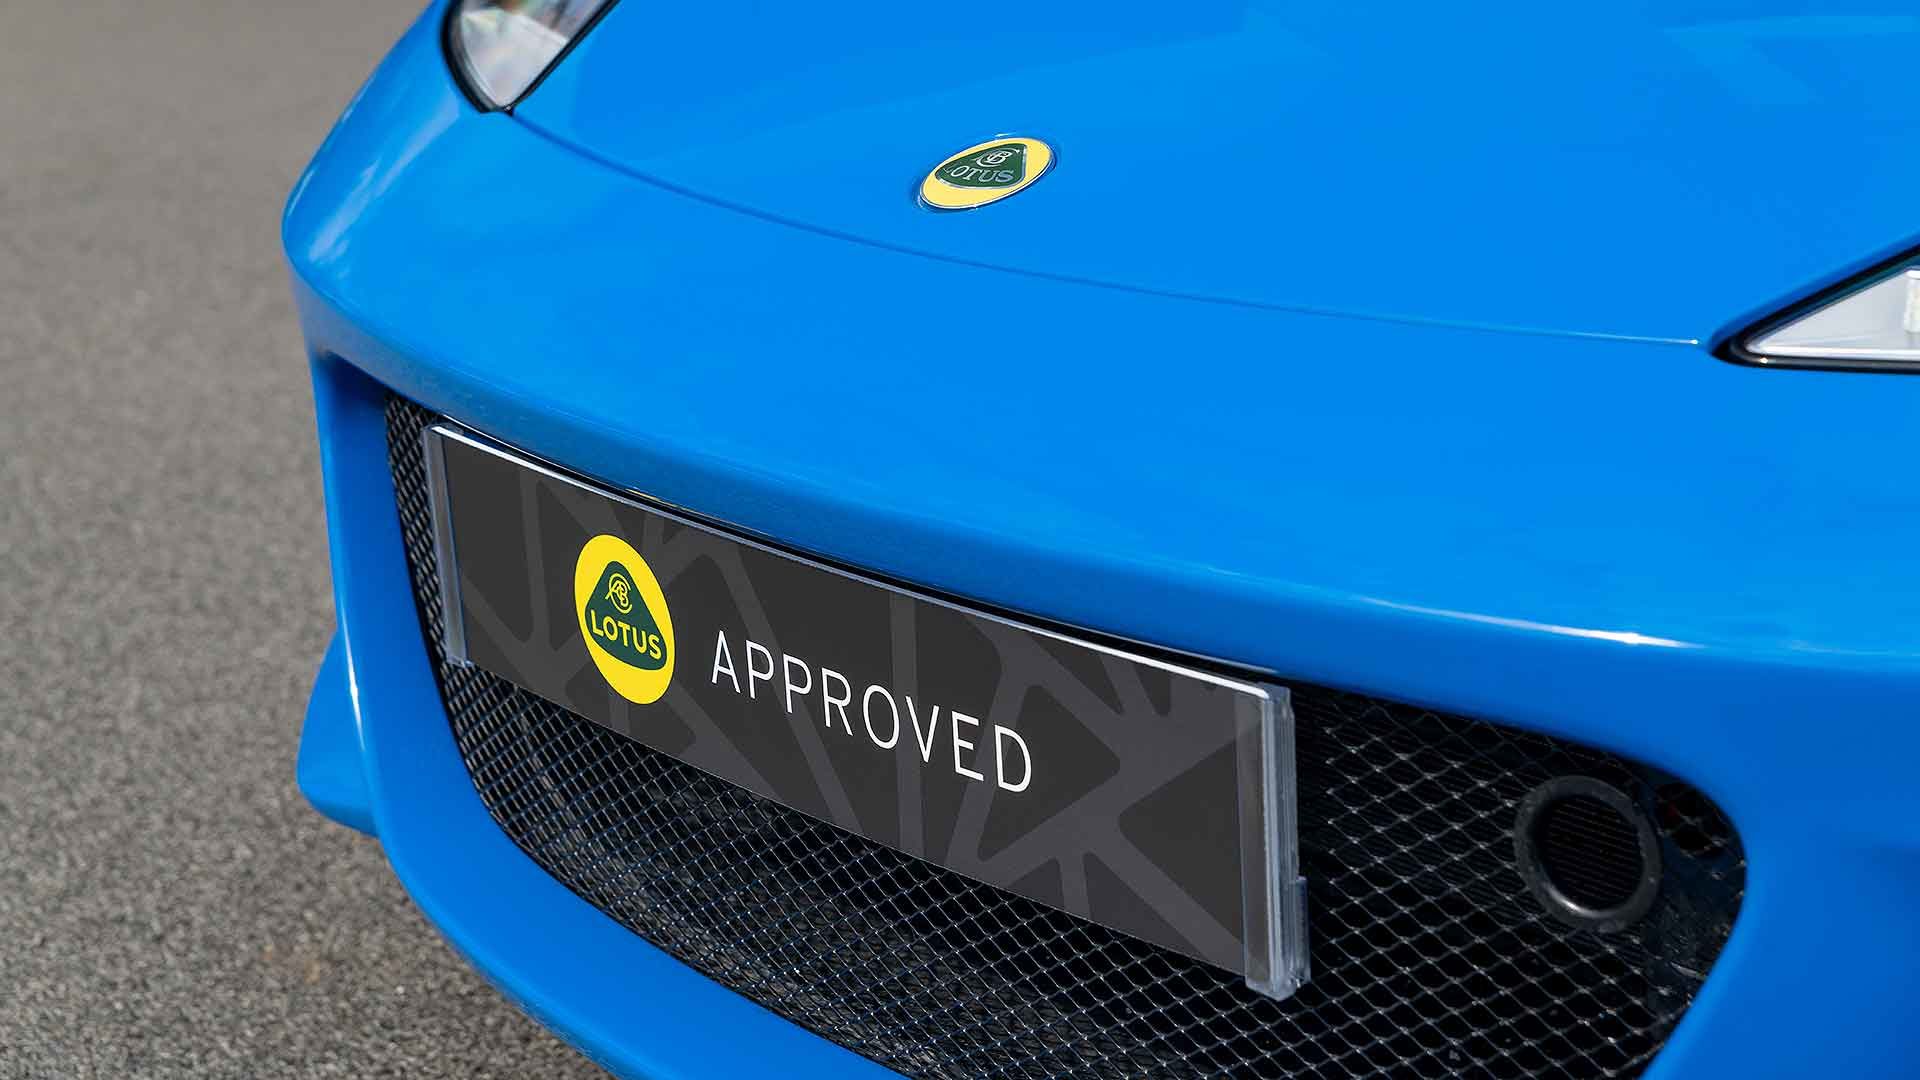 Lotus Approved used car scheme